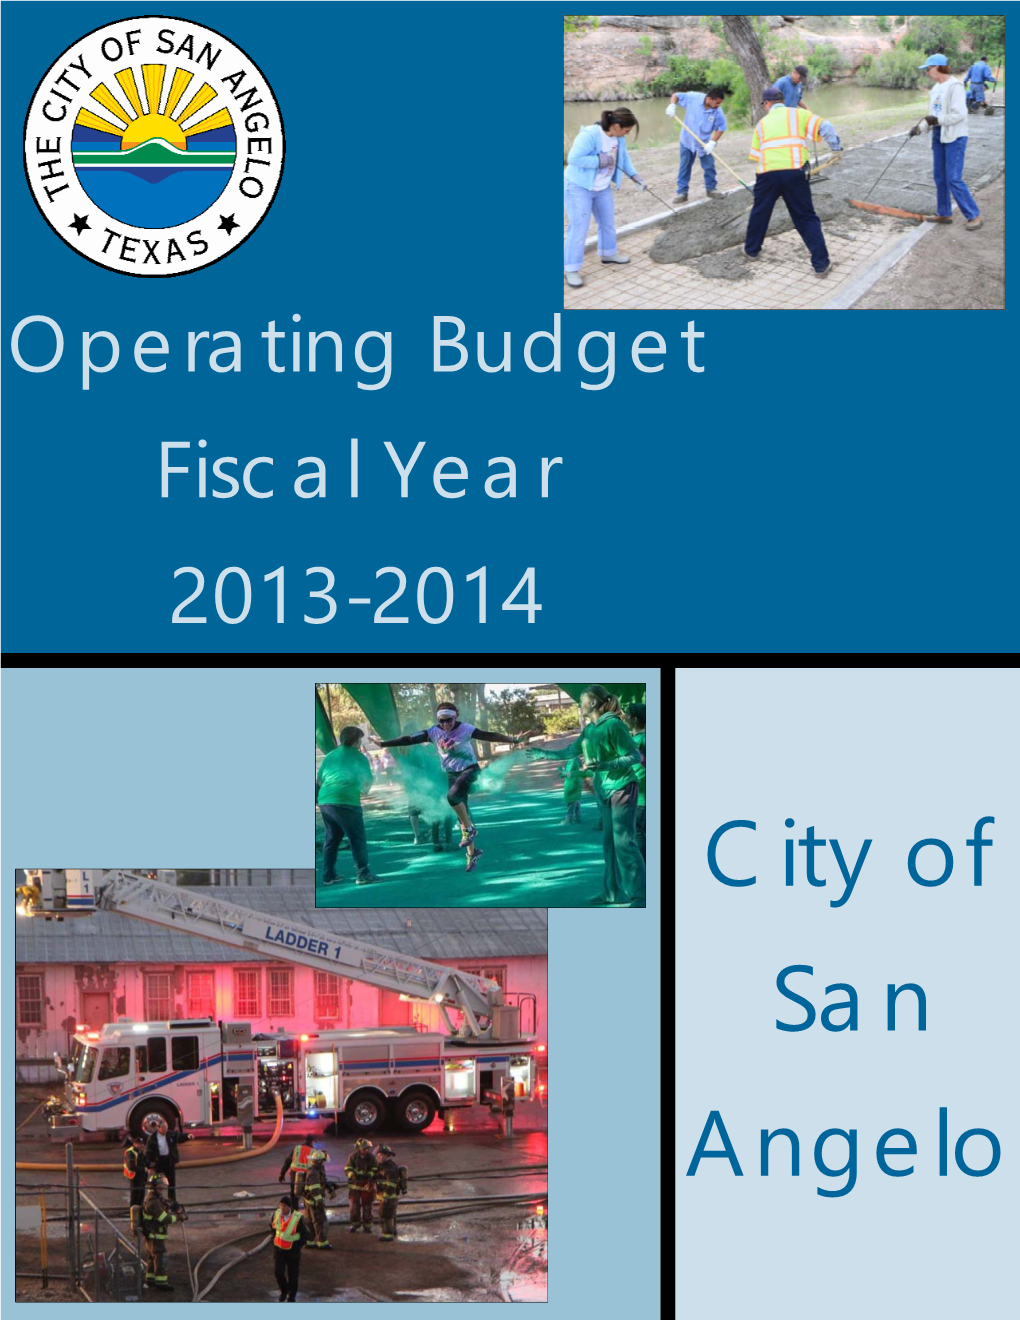 Operating Budget Fiscal Year 2013-2014